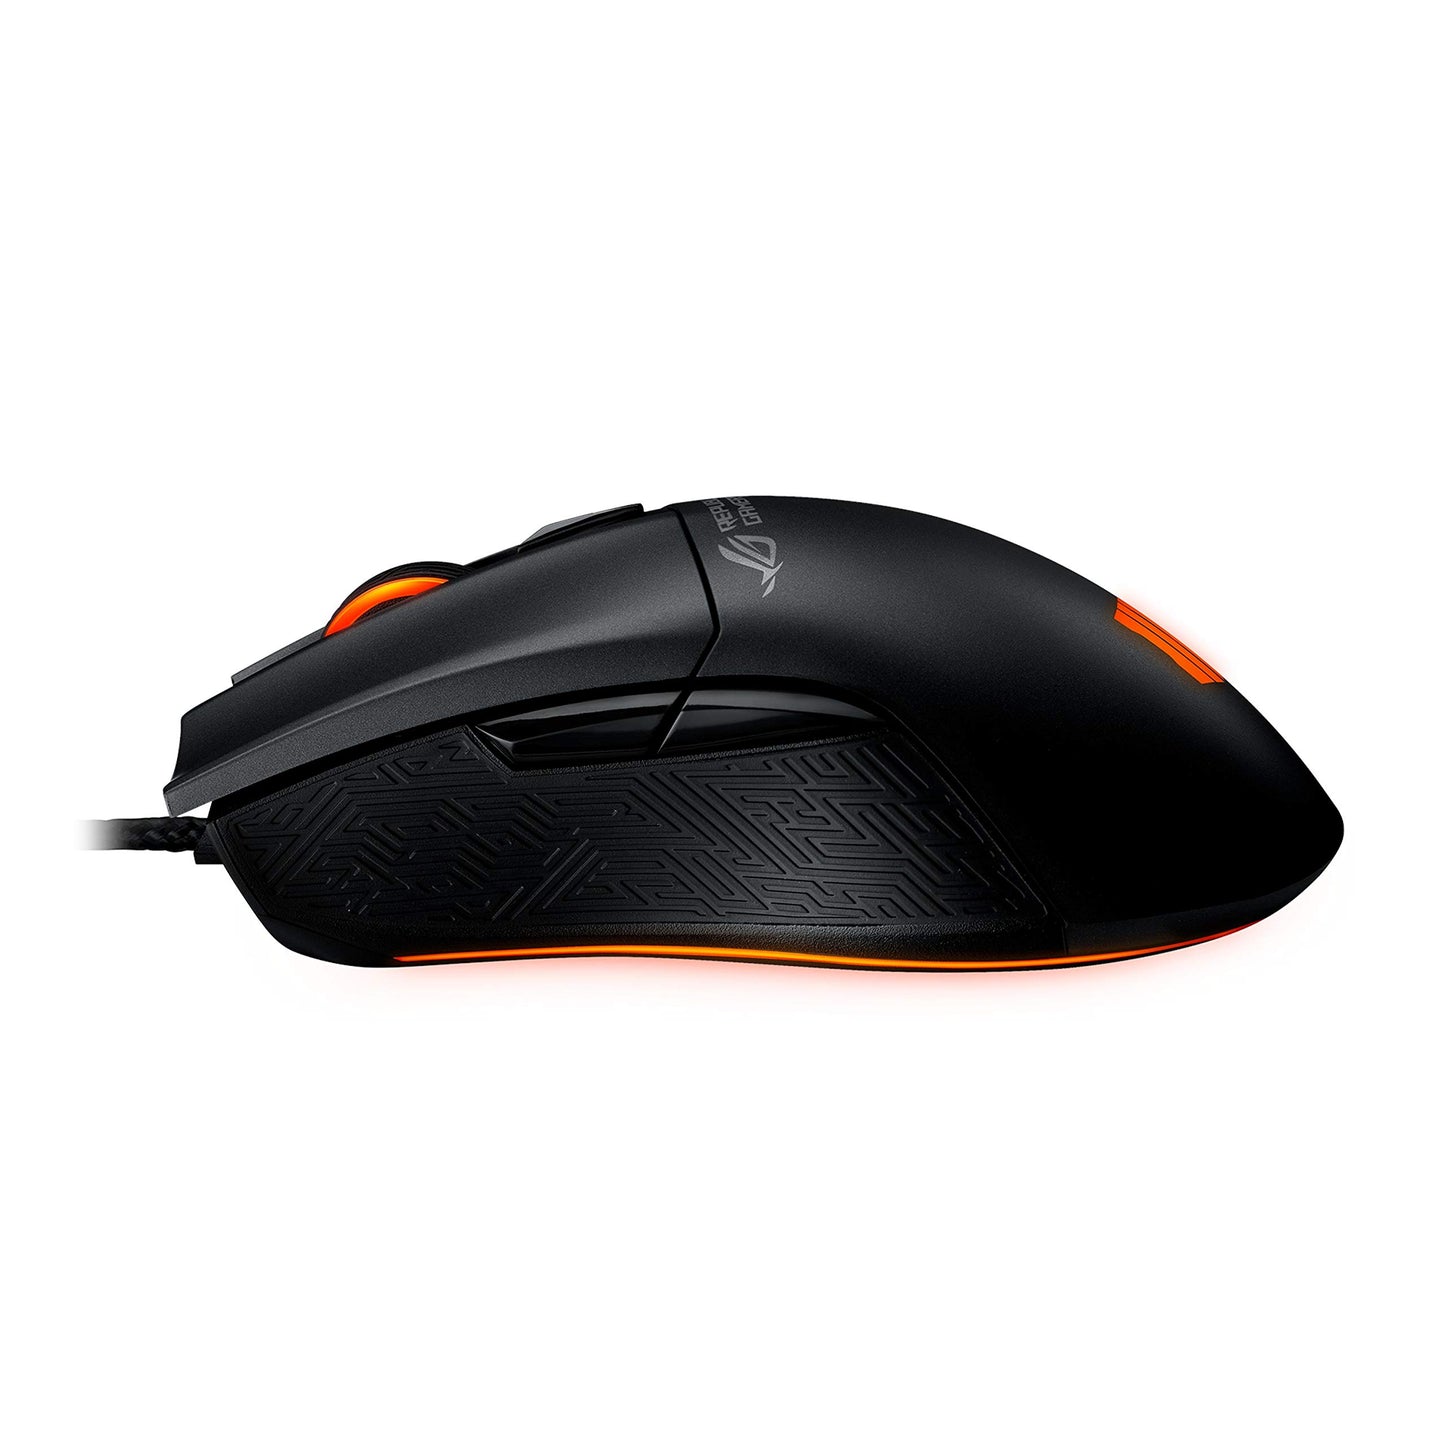 ASUS Rog Strix Carry Wireless and Bluetooth, 7200 Dpi Sensor, Optical Gaming Mouse